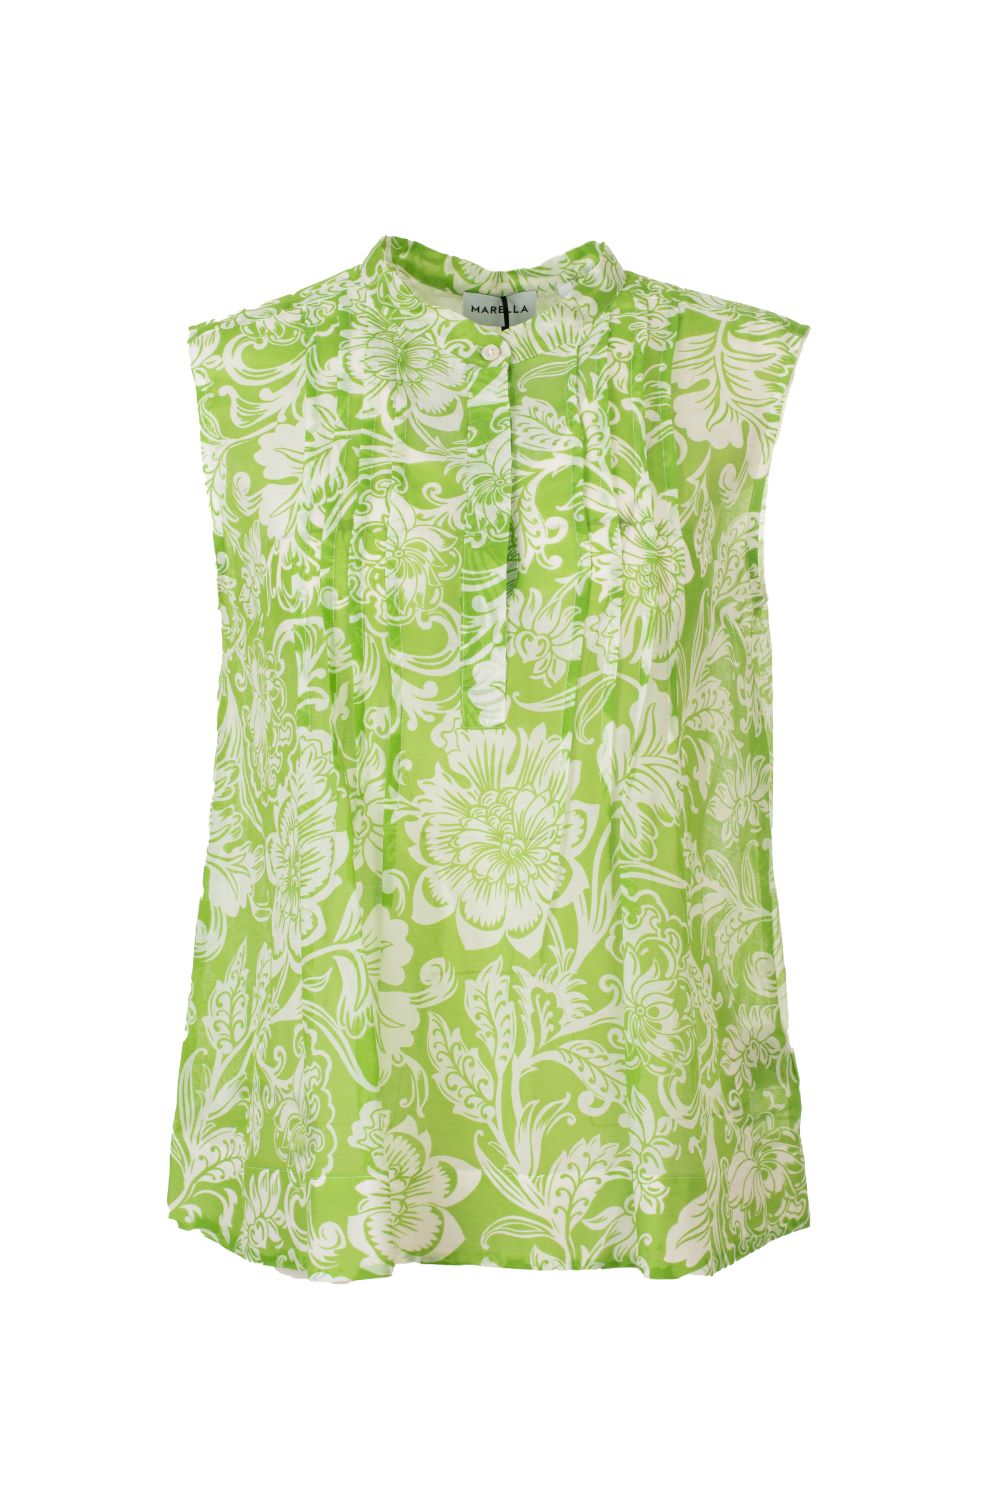 A-Line Floral Sleeveless Blouse with Front Buttoning and Pin-Tucks